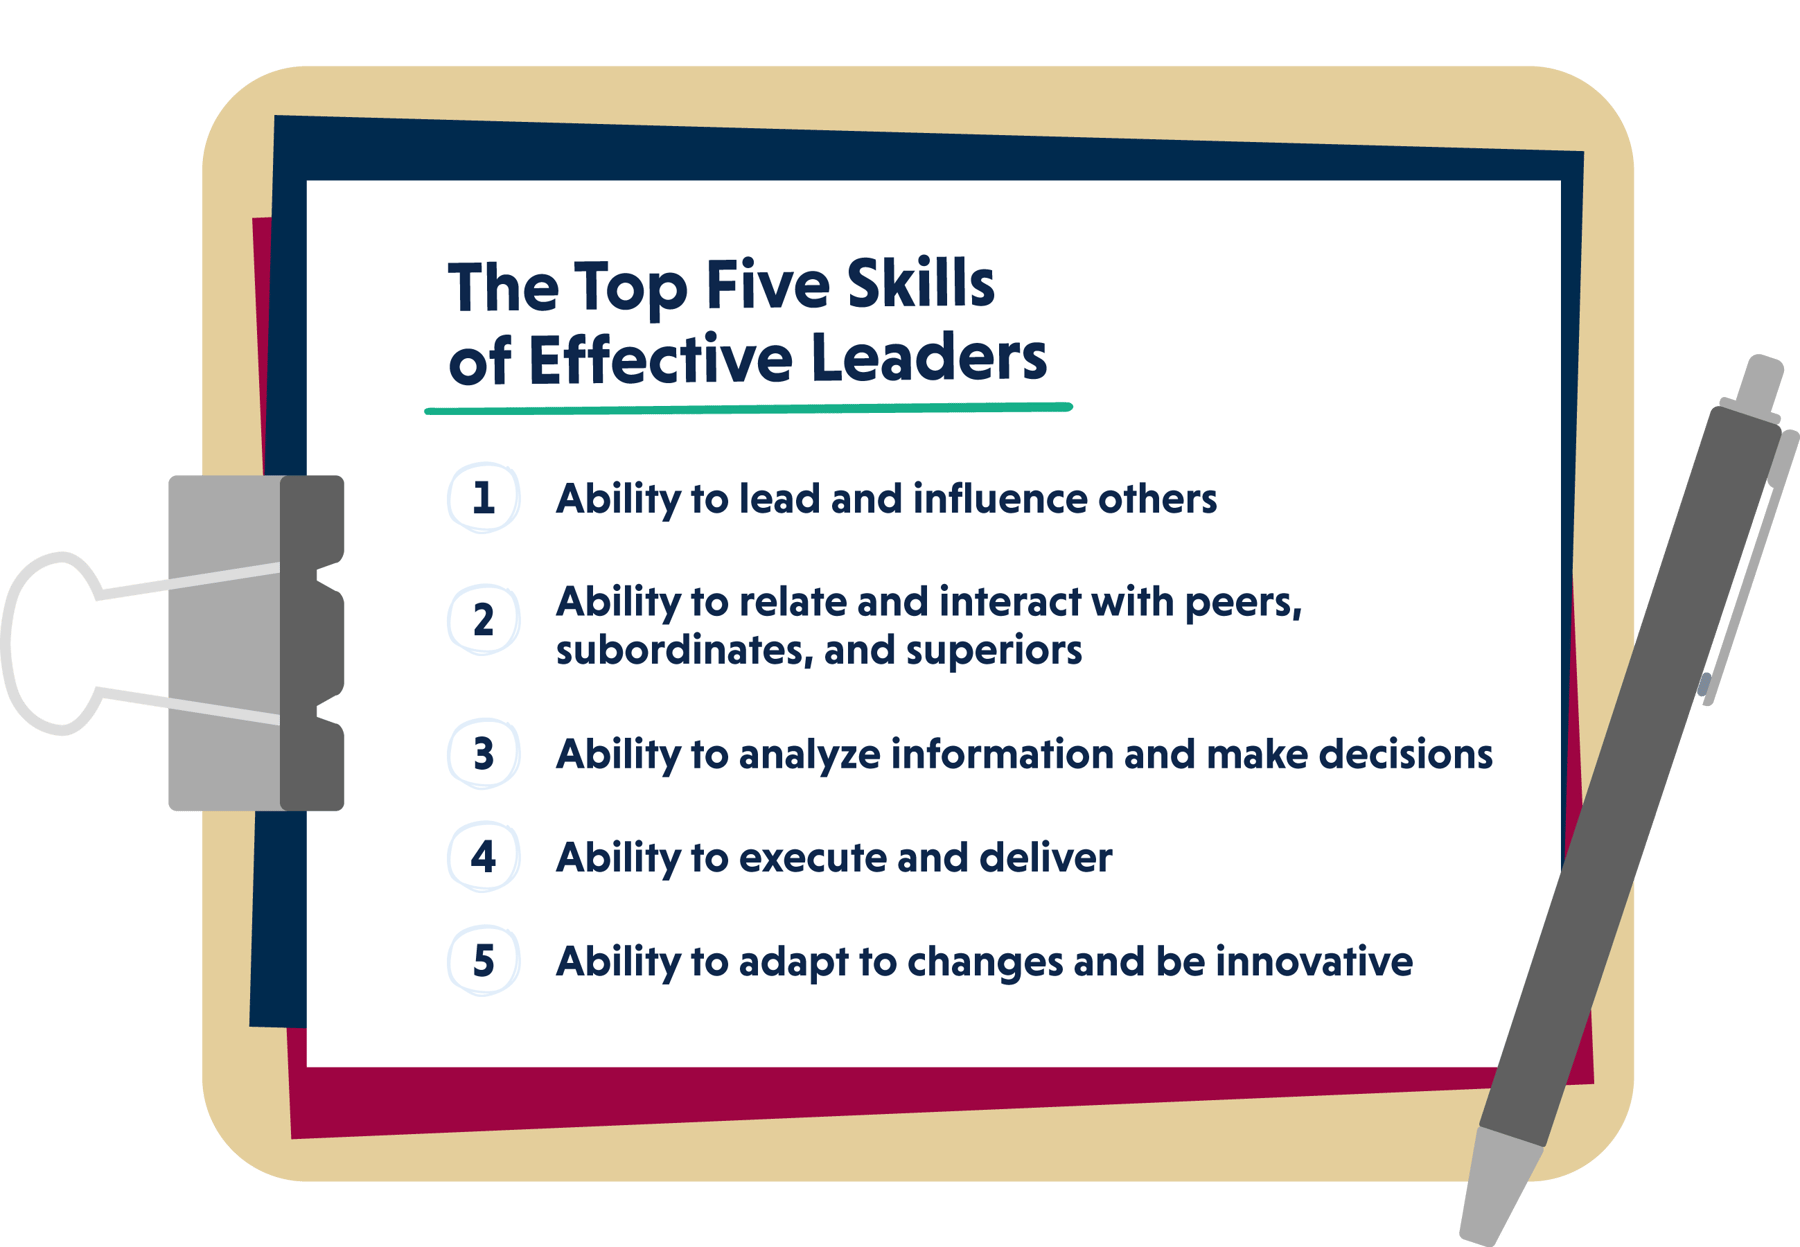 The Top 5 Skills of Effective Leaders